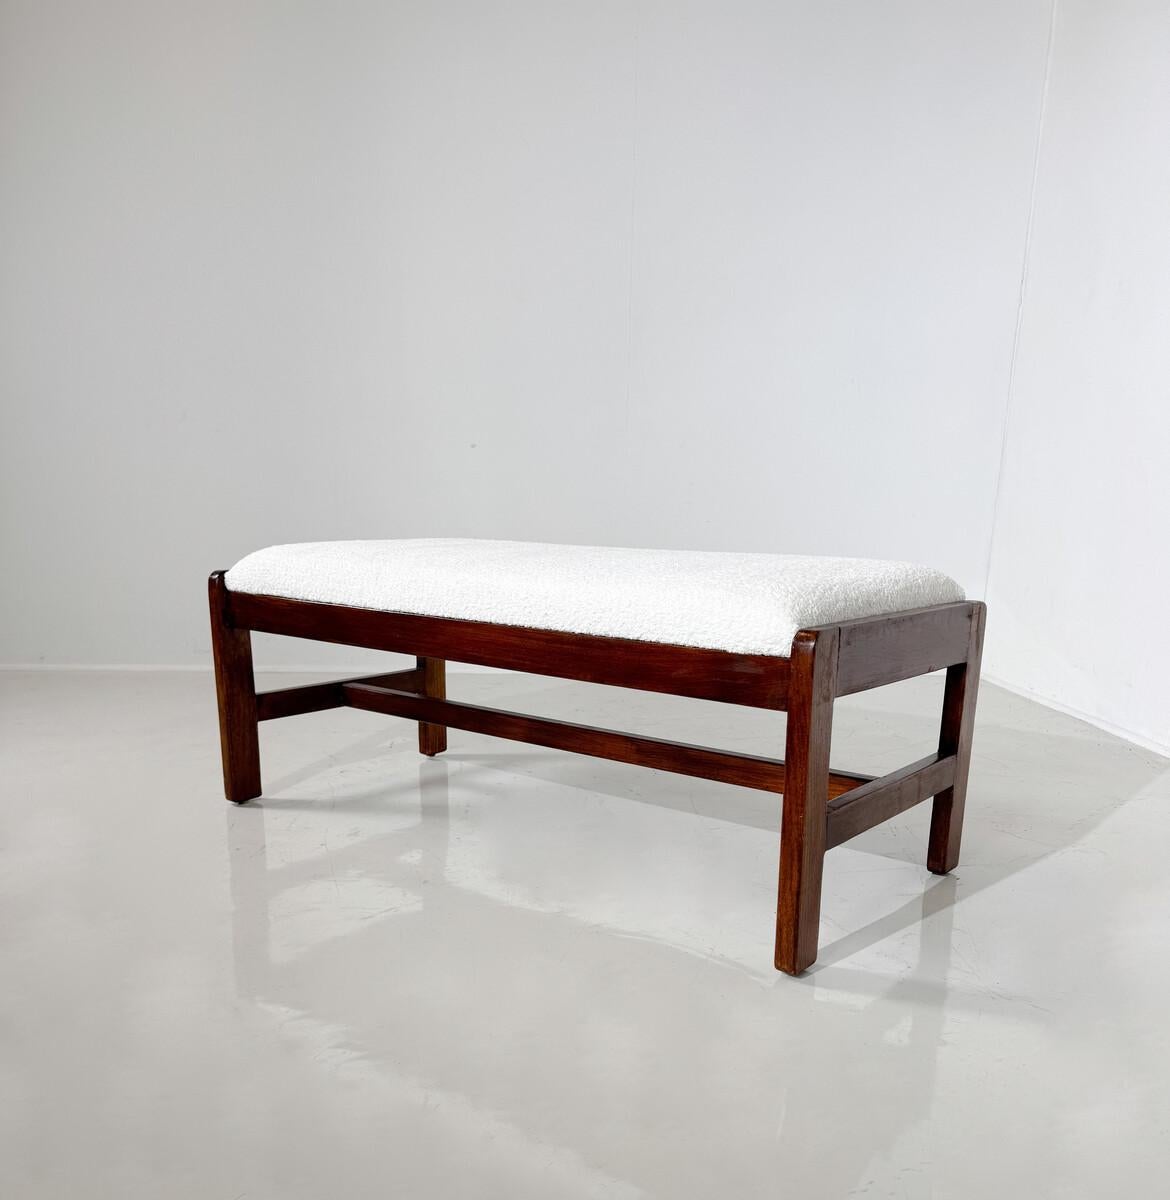 Mid-20th Century Mid-Century Modern Bench, Wood and White Boucle Fabric, Italy, 1960s For Sale